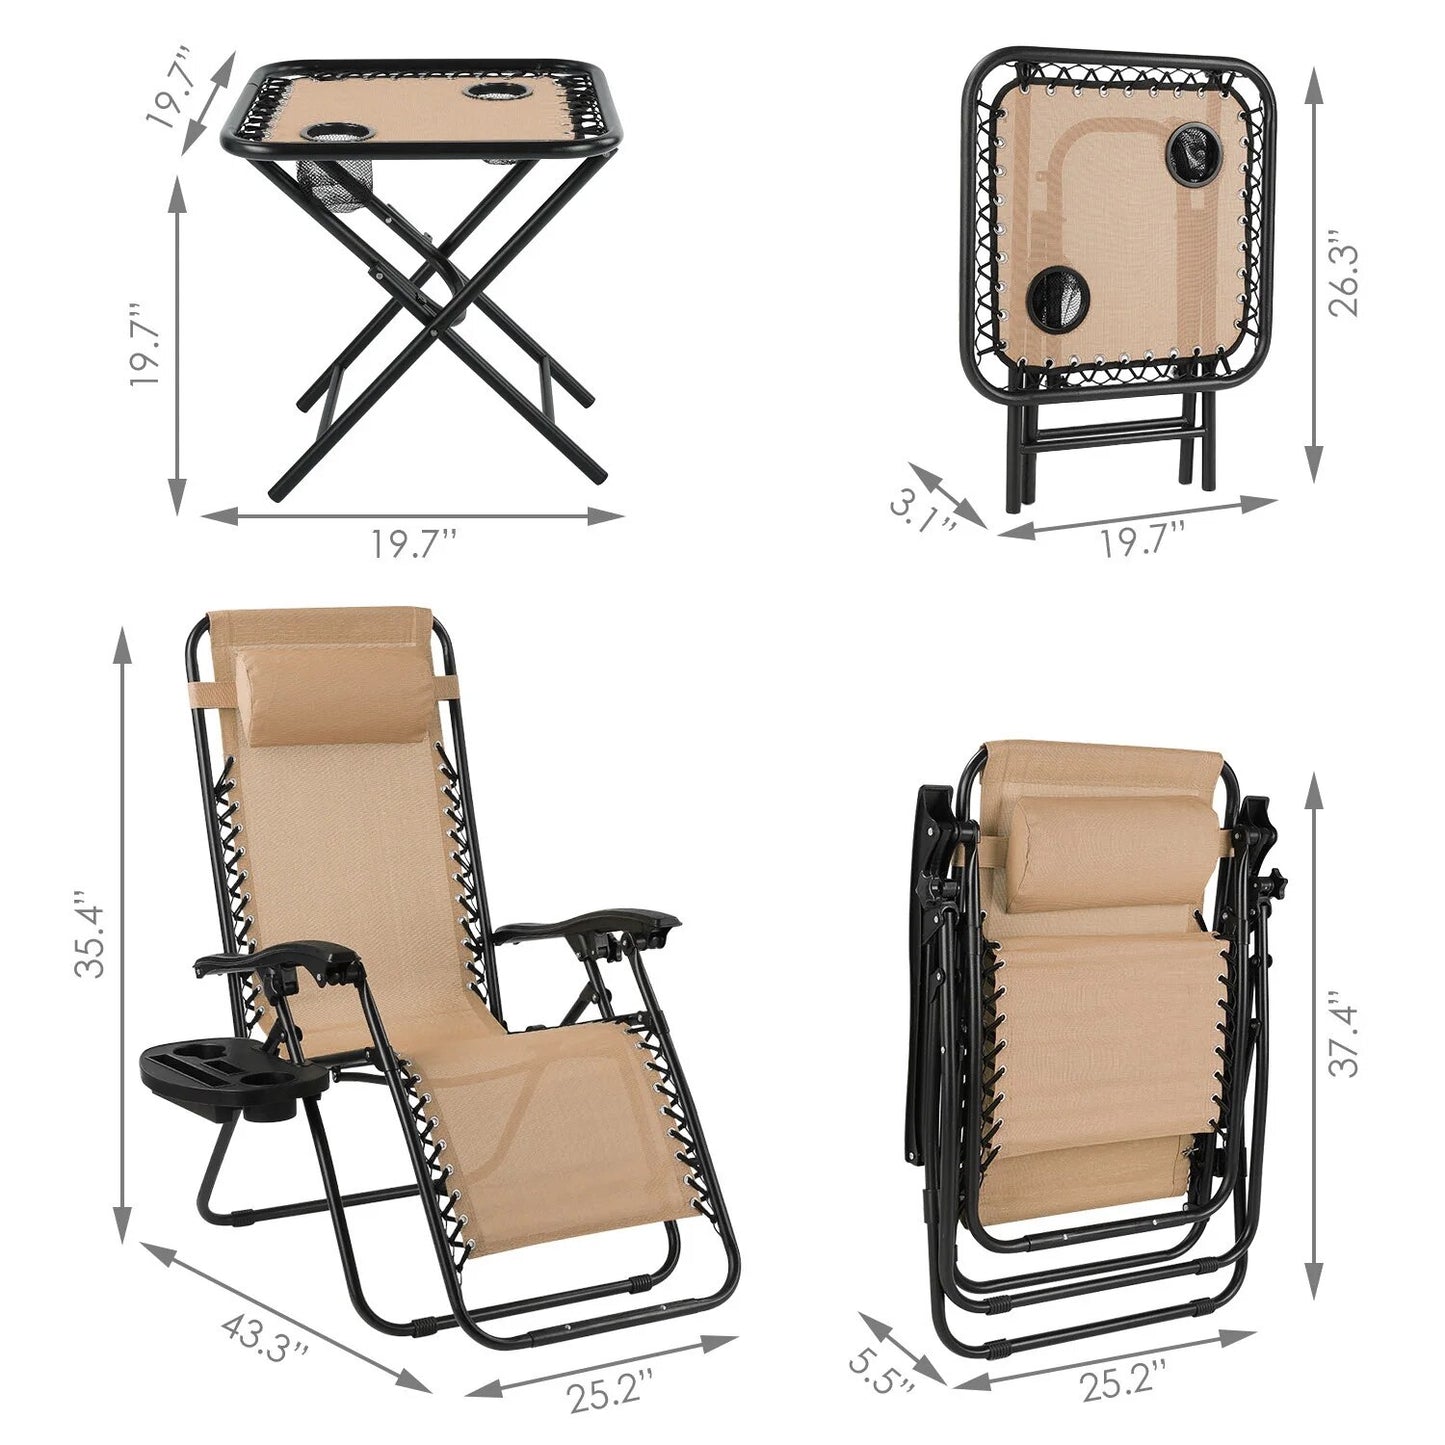 Zero Gravity Chair Foldable with Side Table,Cup Holder,Adjustable Head Cushion for Garden Outdoor